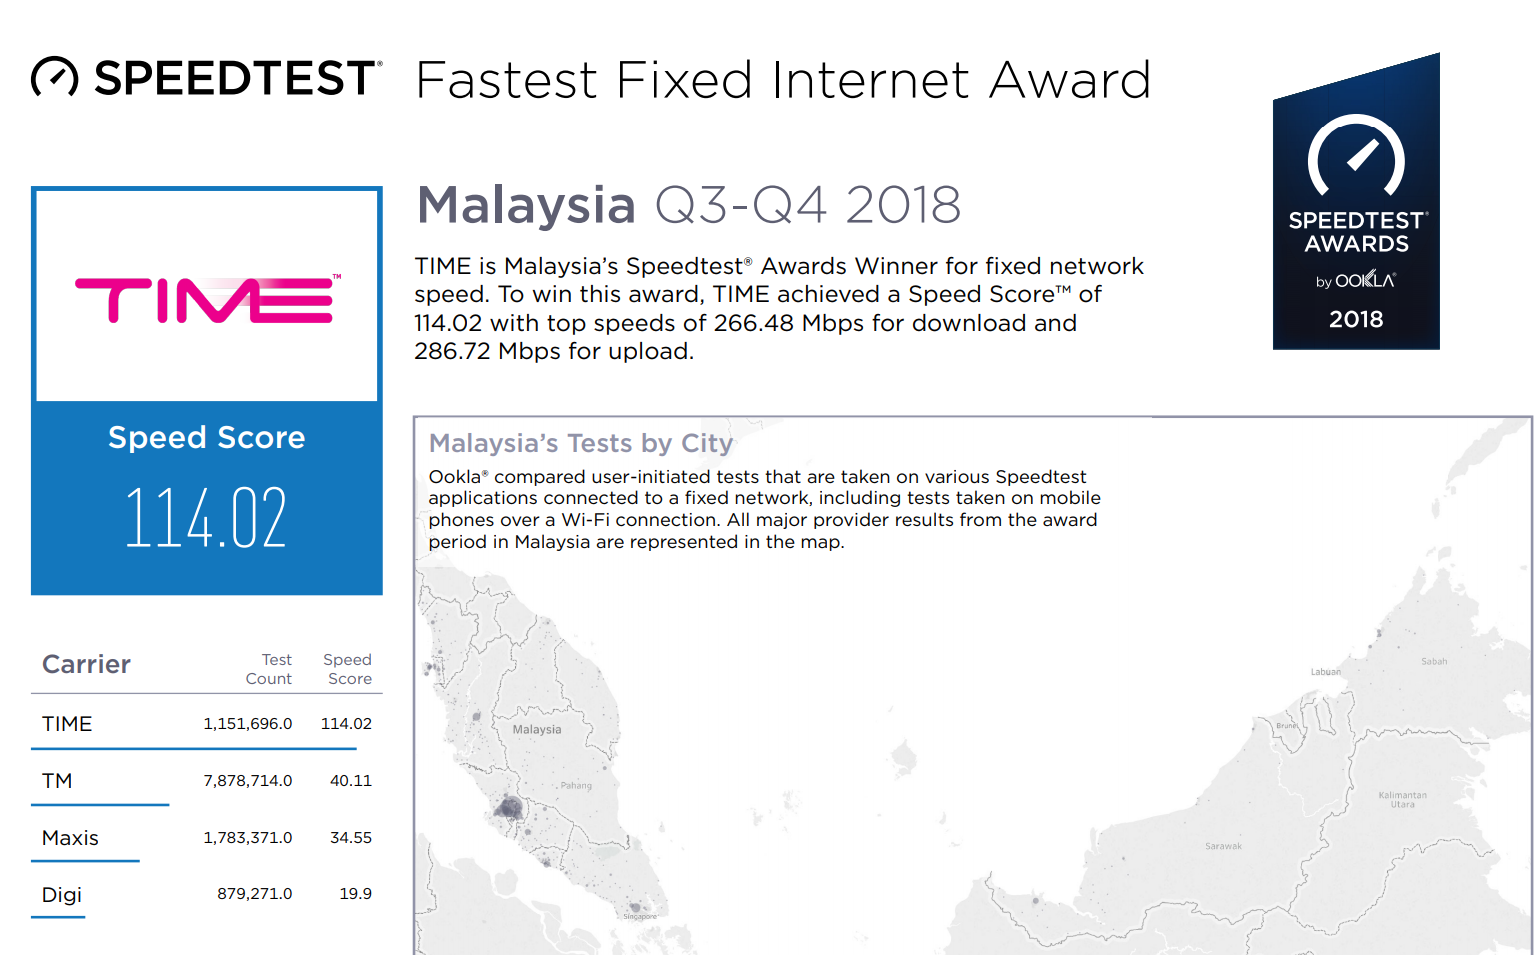 Time Wins Award For The Fastest Fixed Internet Network In Malaysia